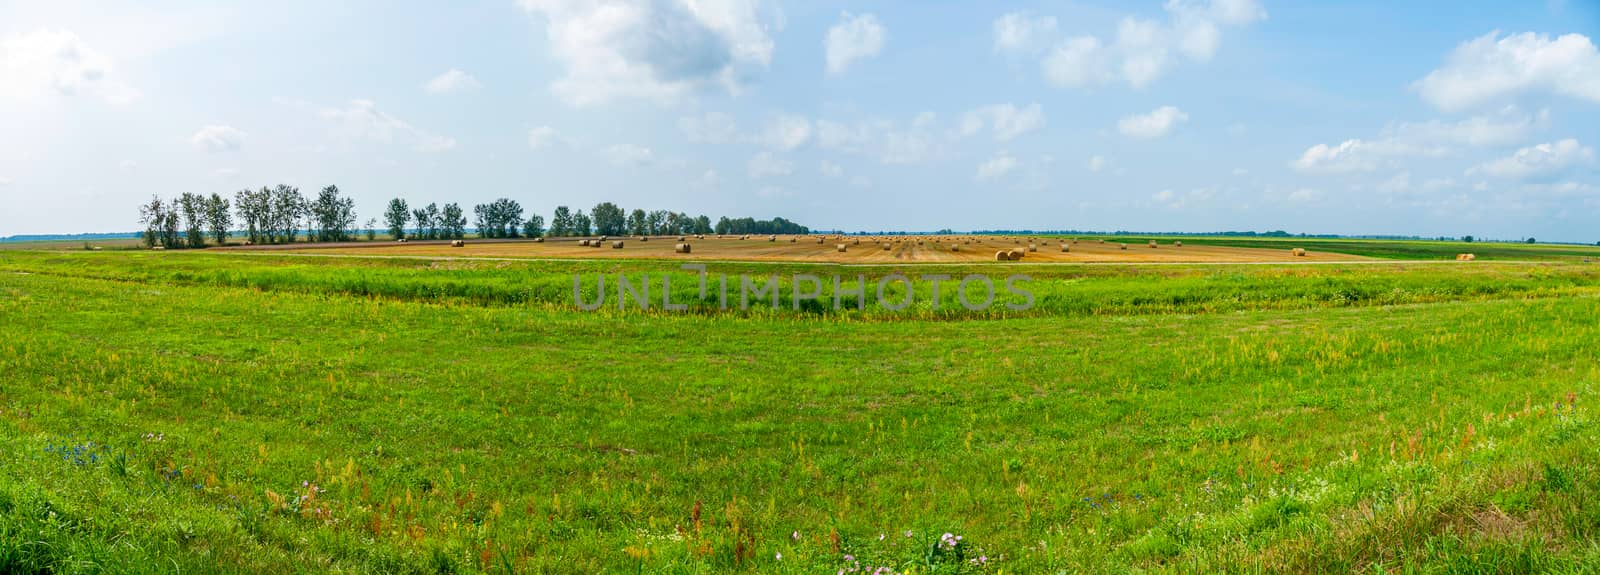 panorama of a vintage field with haystacks by Adamchuk